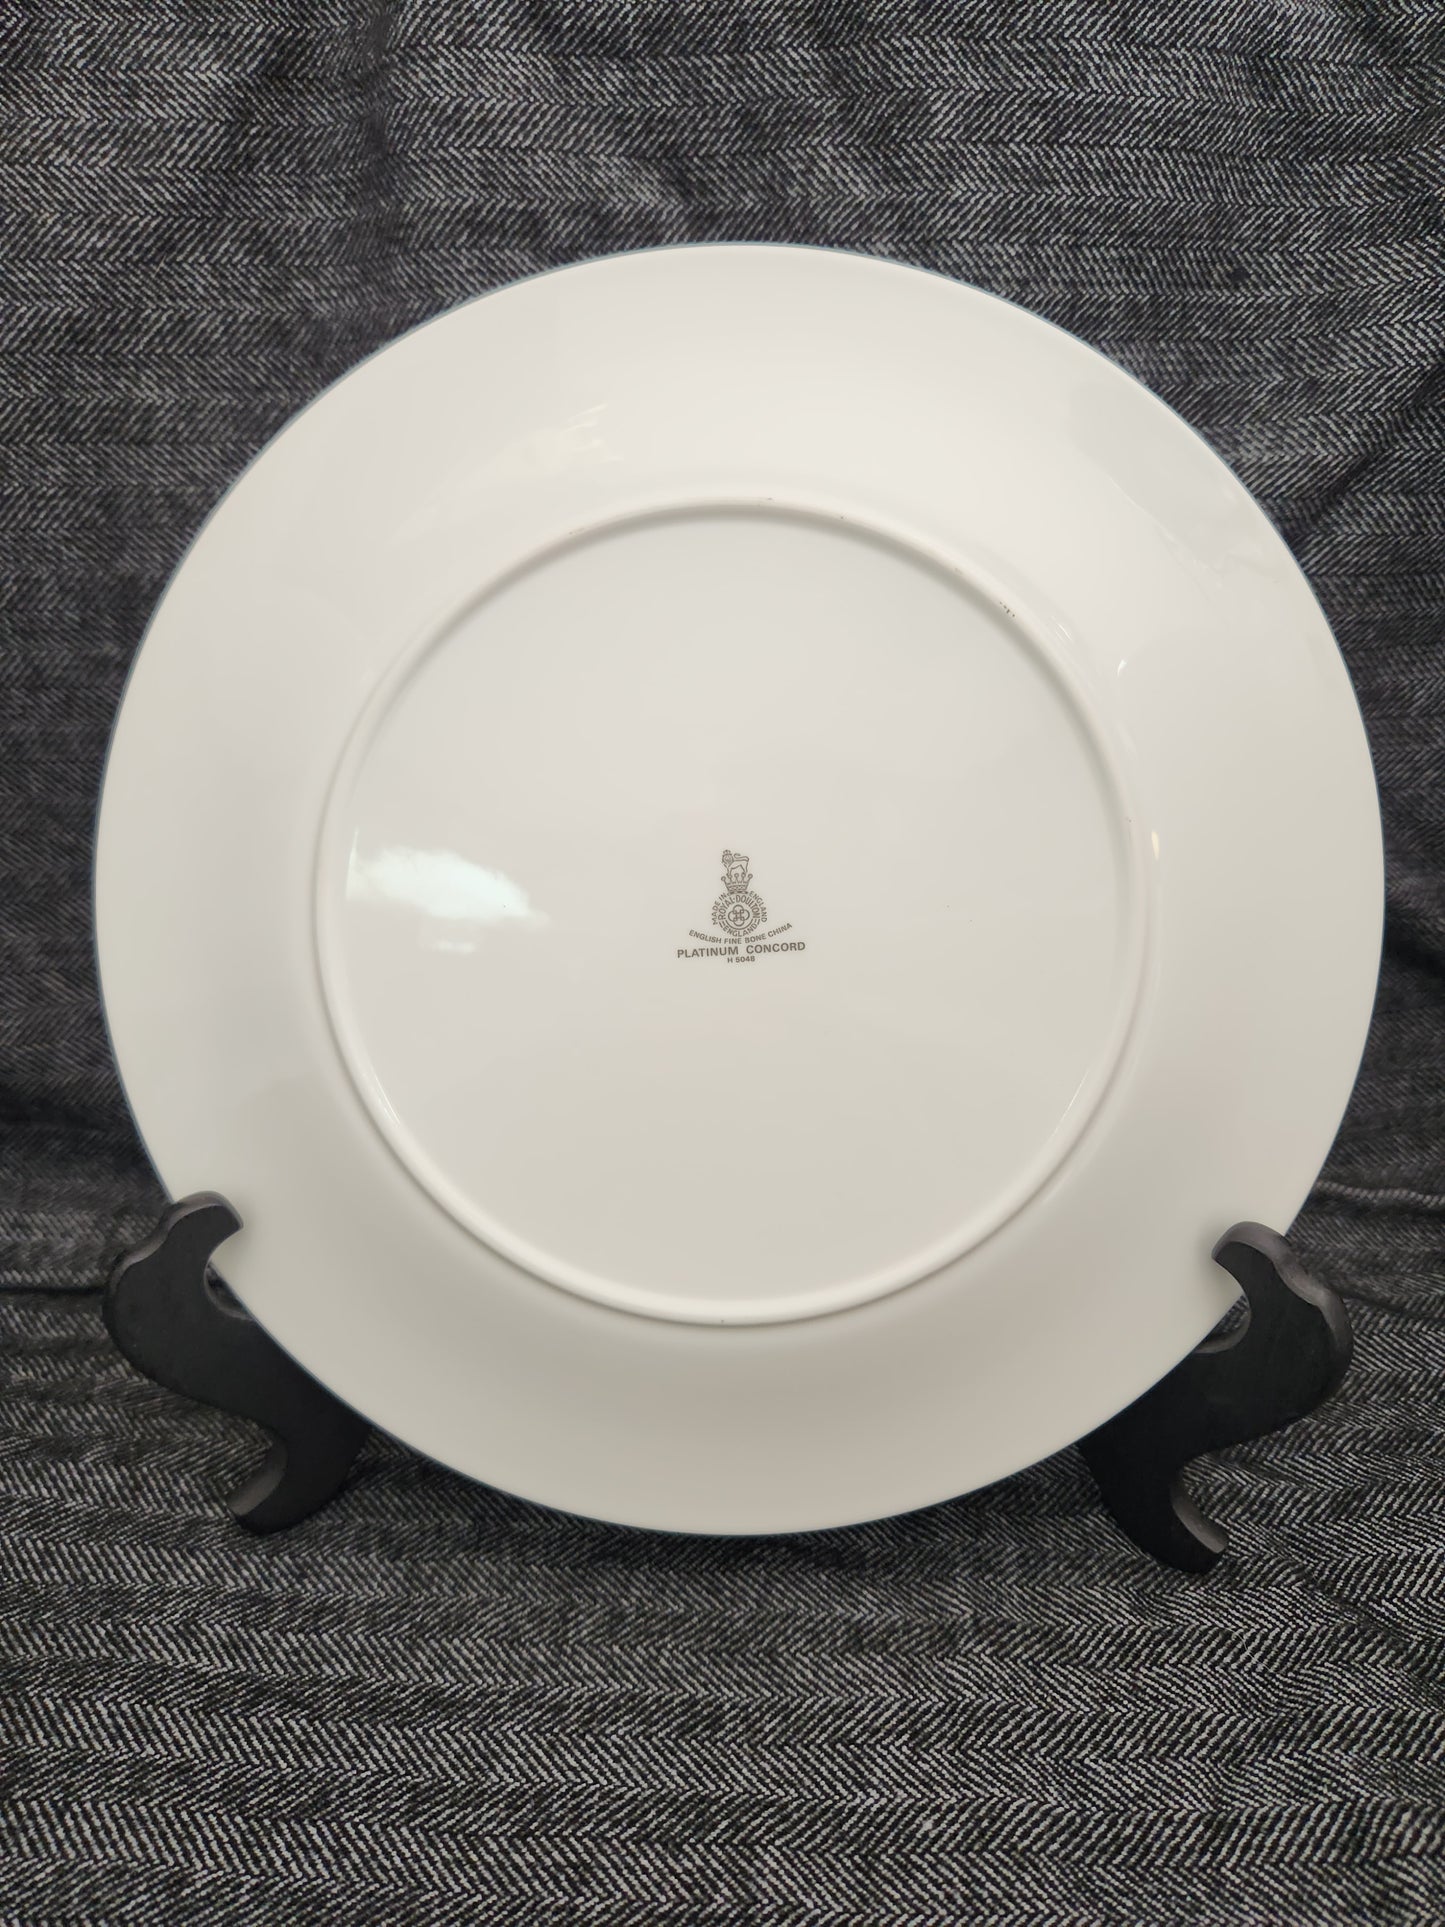 Concord Platinum 10-3/4" Dinner Plate by Royal Doulton - #H5048